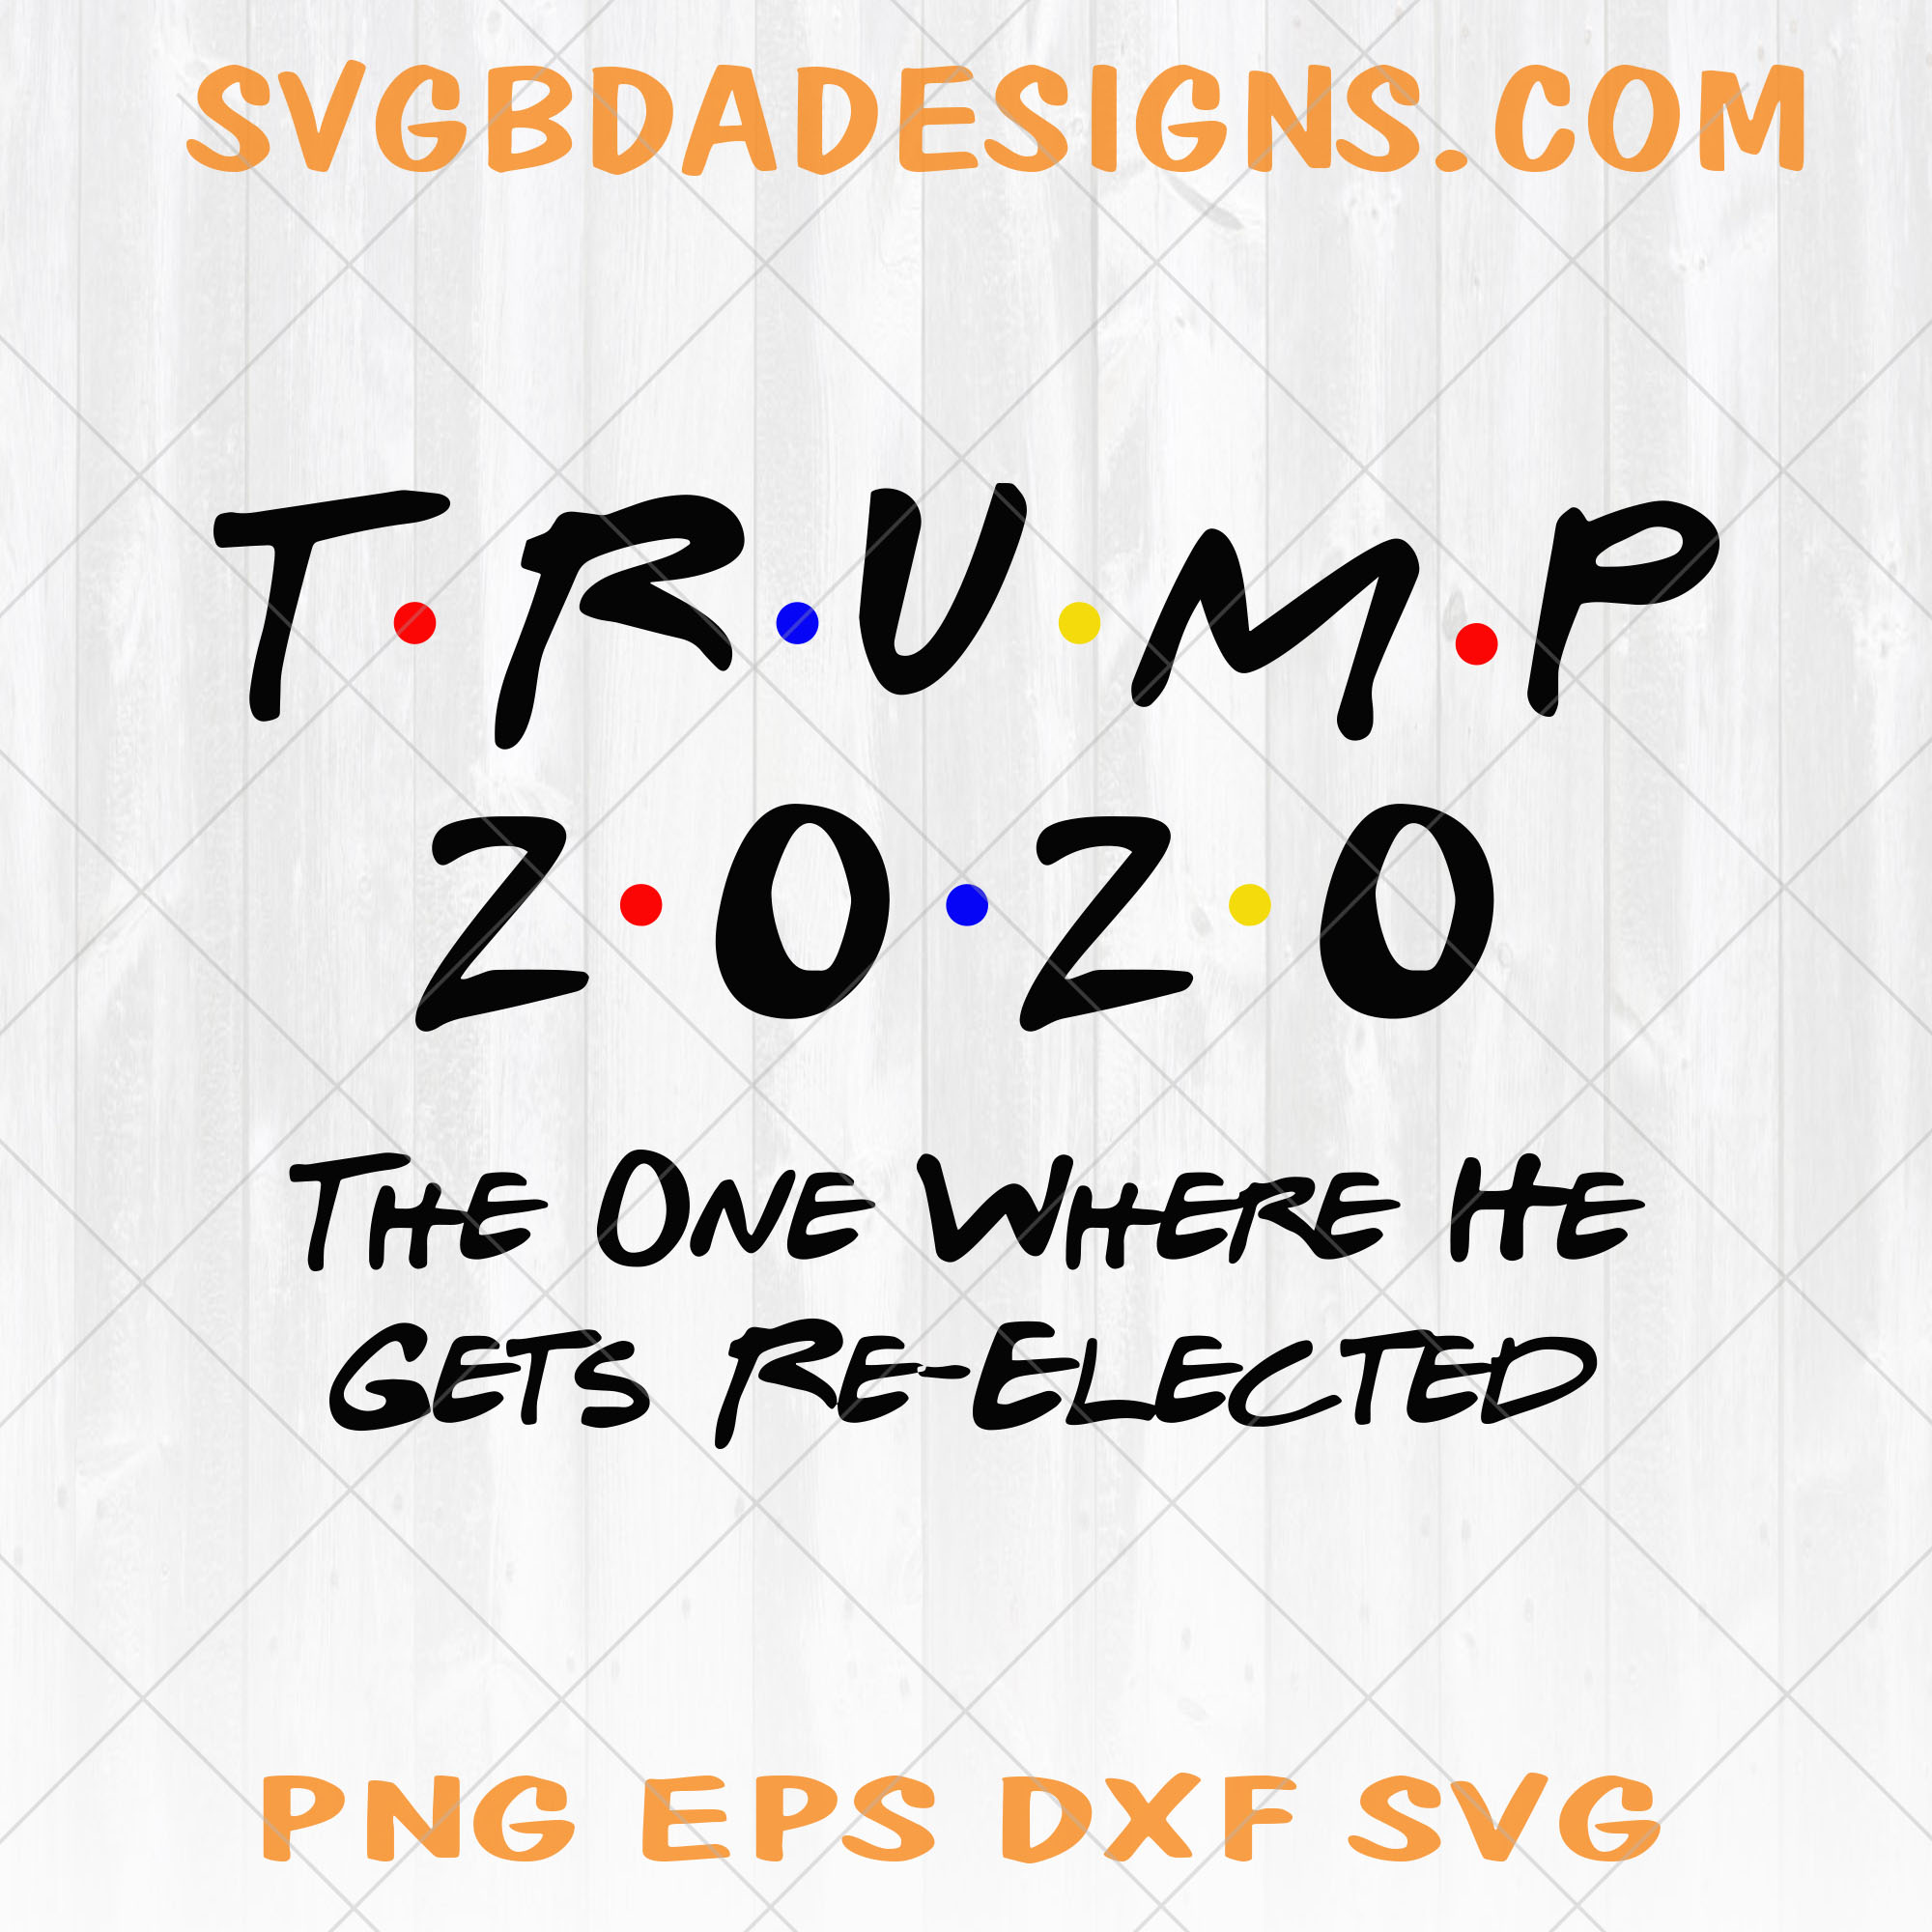 Trump 2020 The One Where He Gets Re-Elected Svg - Trump 2020 The One Where He Gets Re-Elected Trump Svg - Donal Trump Svg